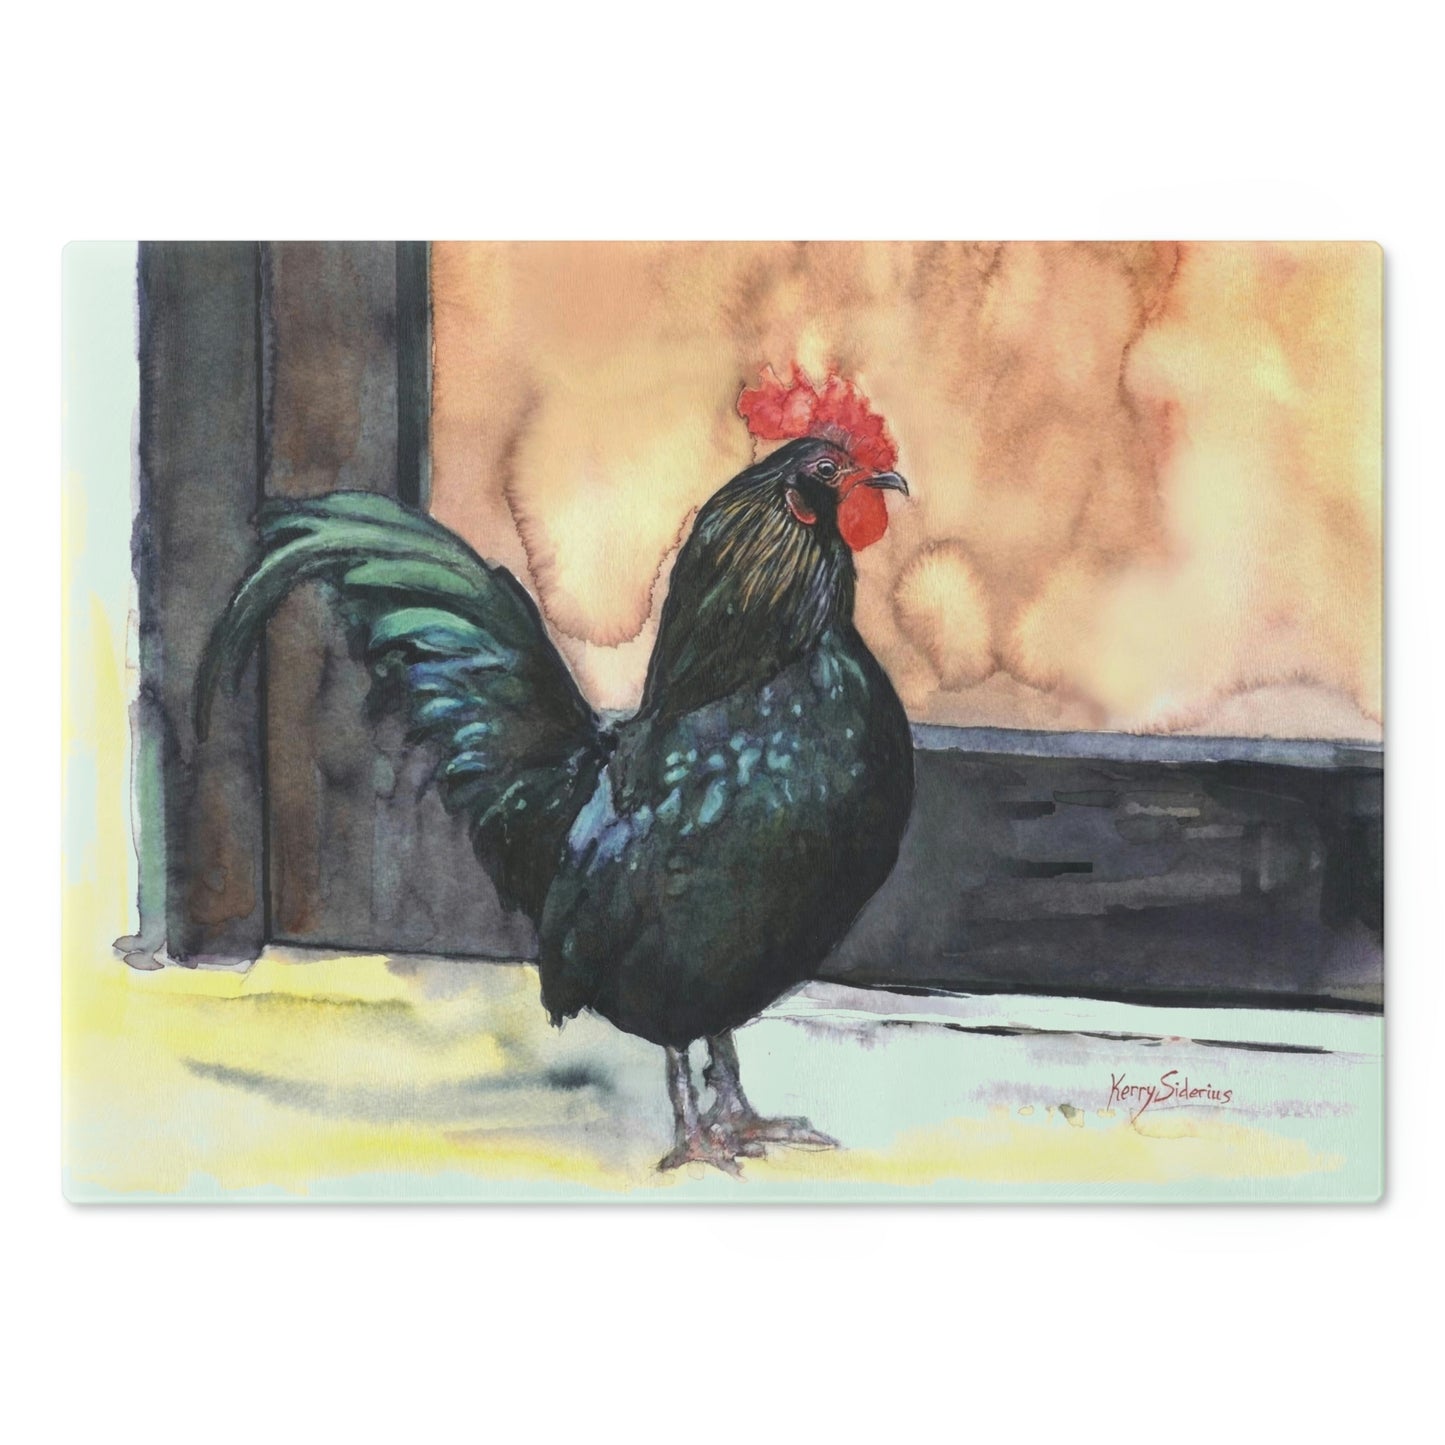 "There's a Rooster at My Door" Large Cutting Board - Kerry Siderius Art 